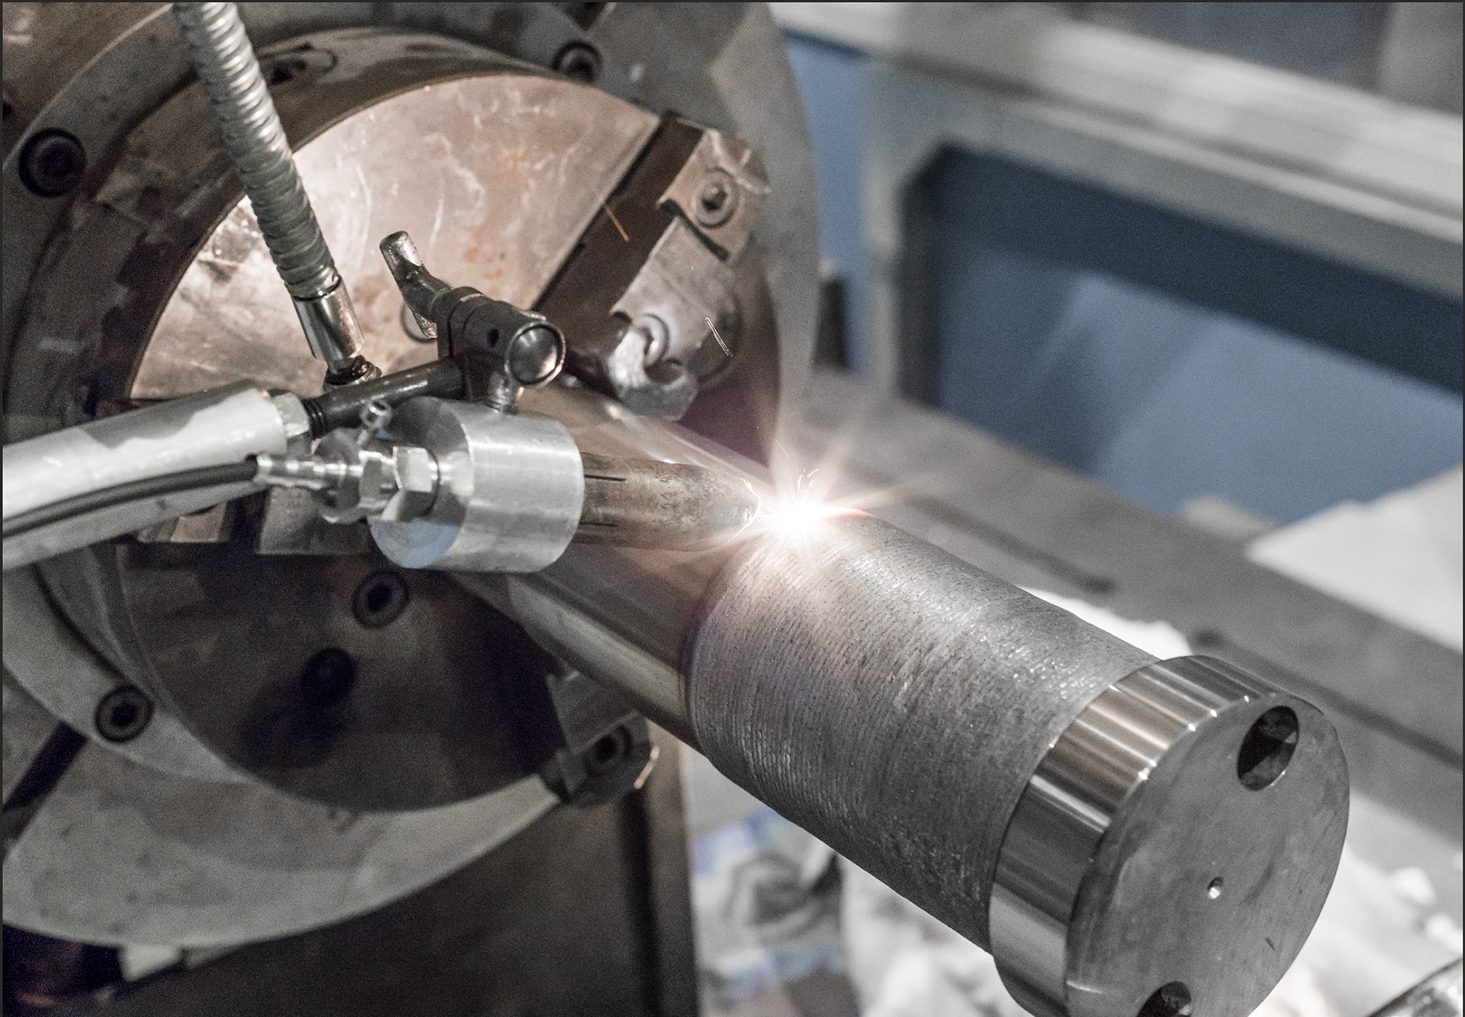 3D Laser cladding at FORCE Technology